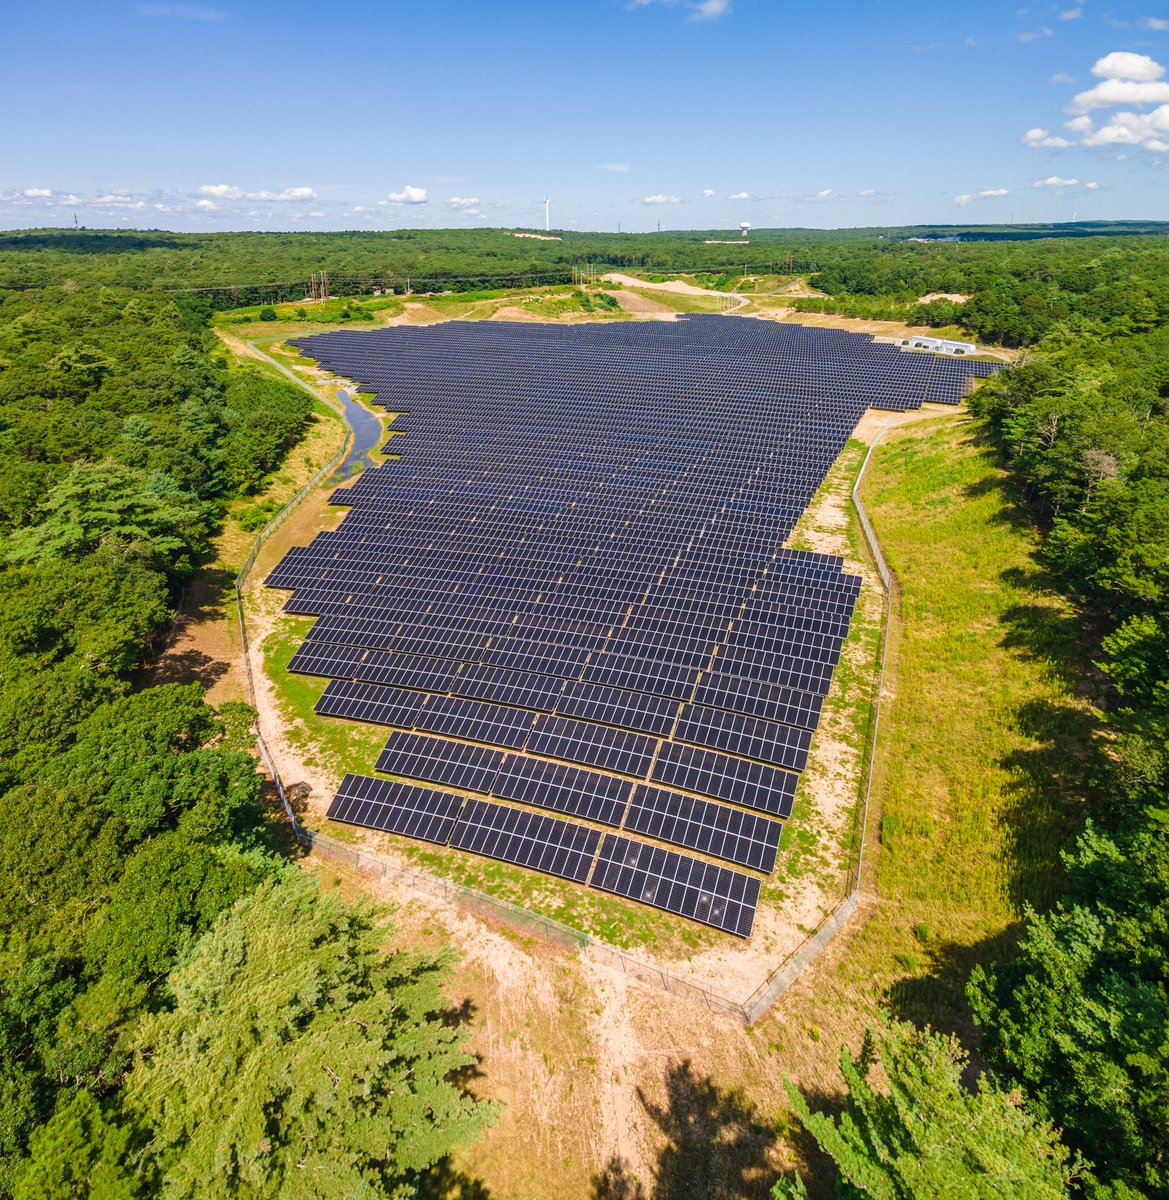 📍 Blacksmith Road Solar, Falmouth, MA More than 17,000 solar modules generating 7 megawatts of #cleanenergy! ☀️